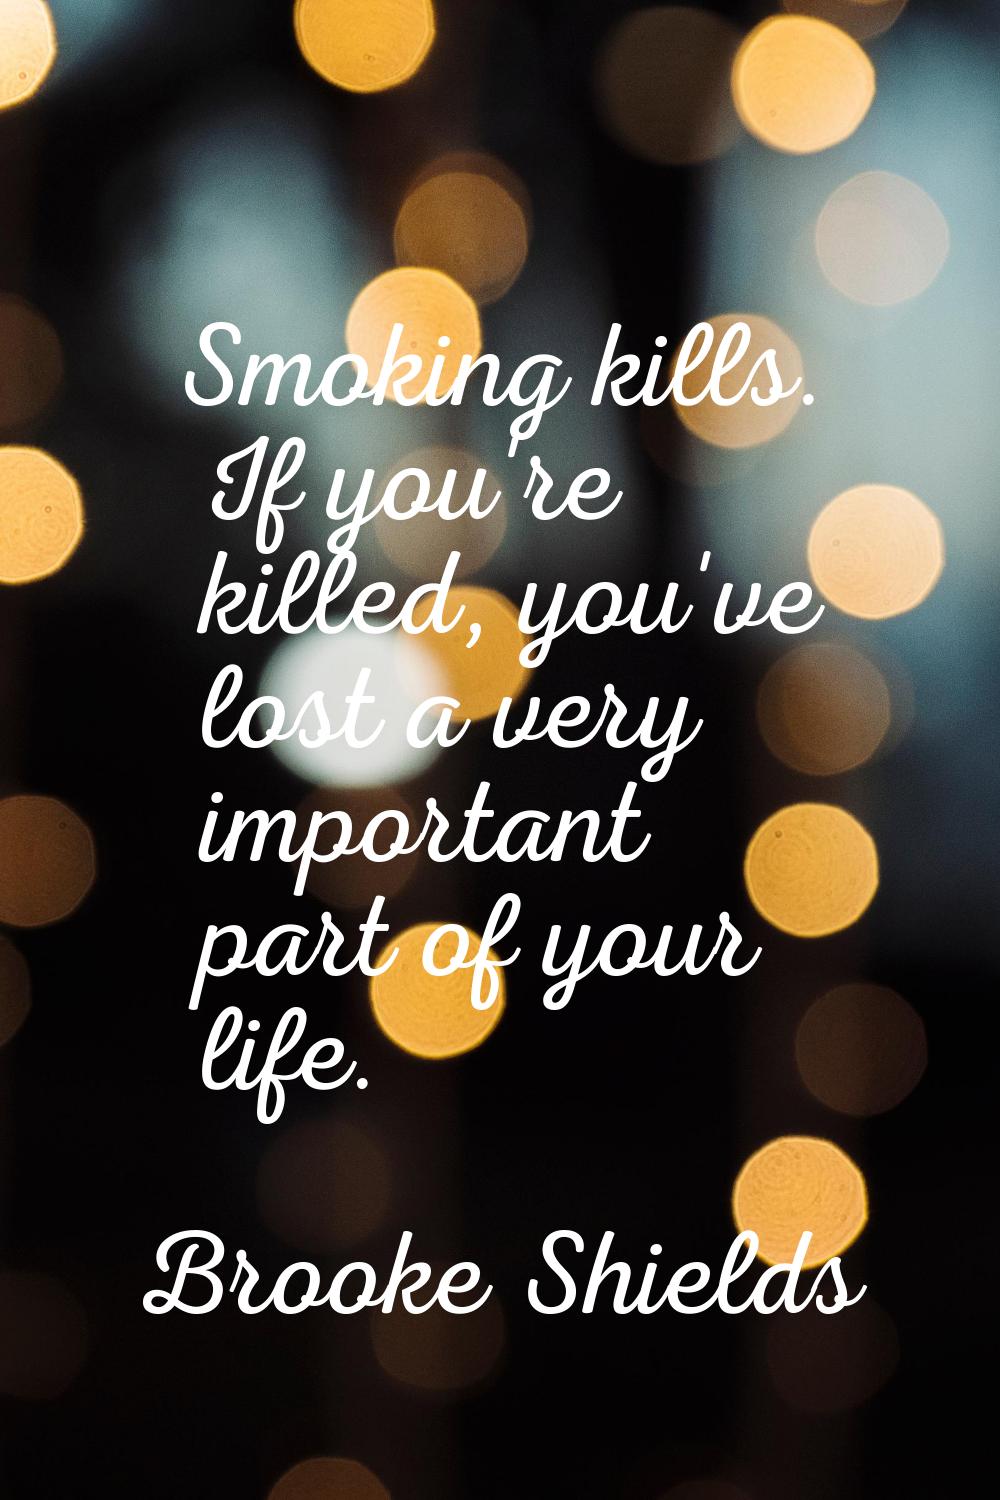 Smoking kills. If you're killed, you've lost a very important part of your life.